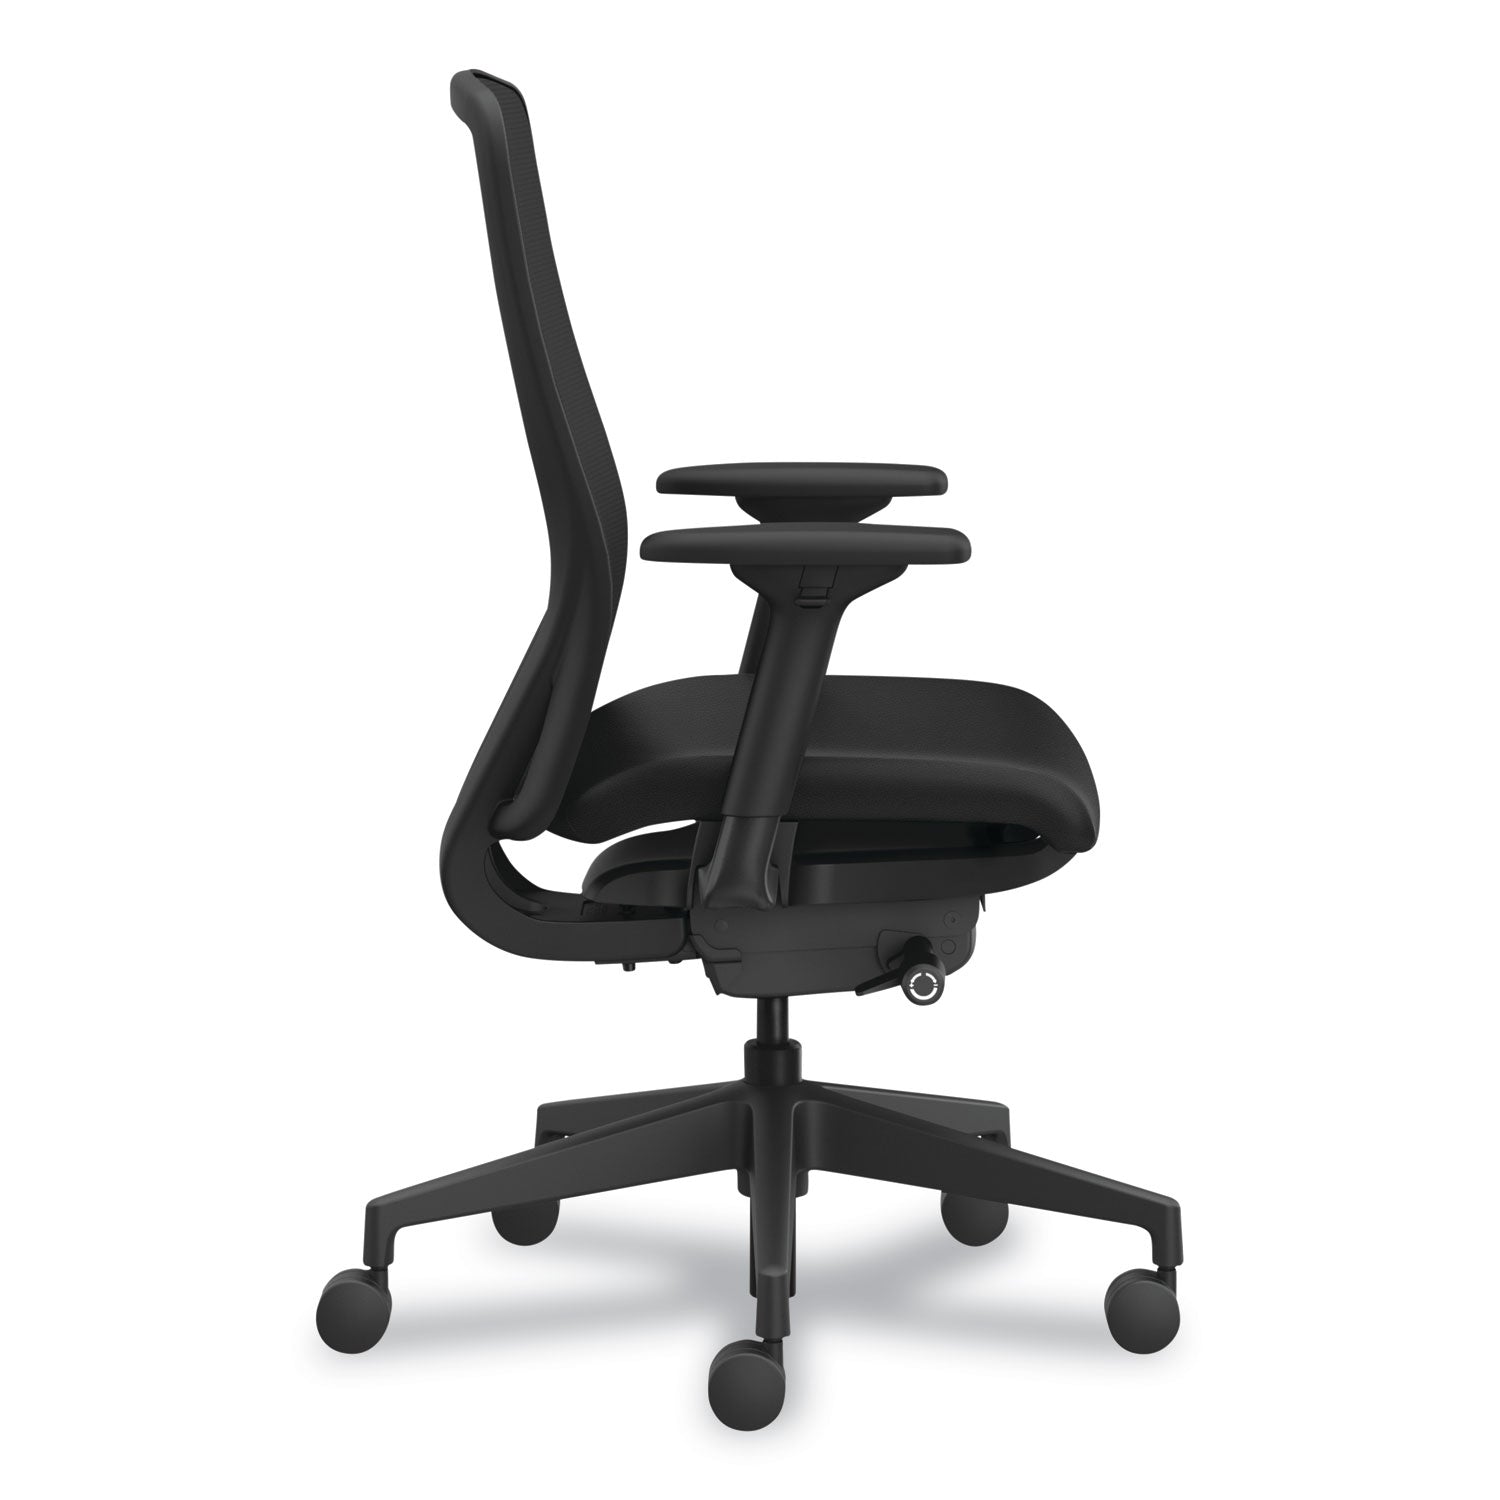 nucleus-series-recharge-task-chair-supports-up-to-300-lb-1663-to-2113-seat-height-black-ships-in-7-10-business-days_honnr12samu10bt - 2